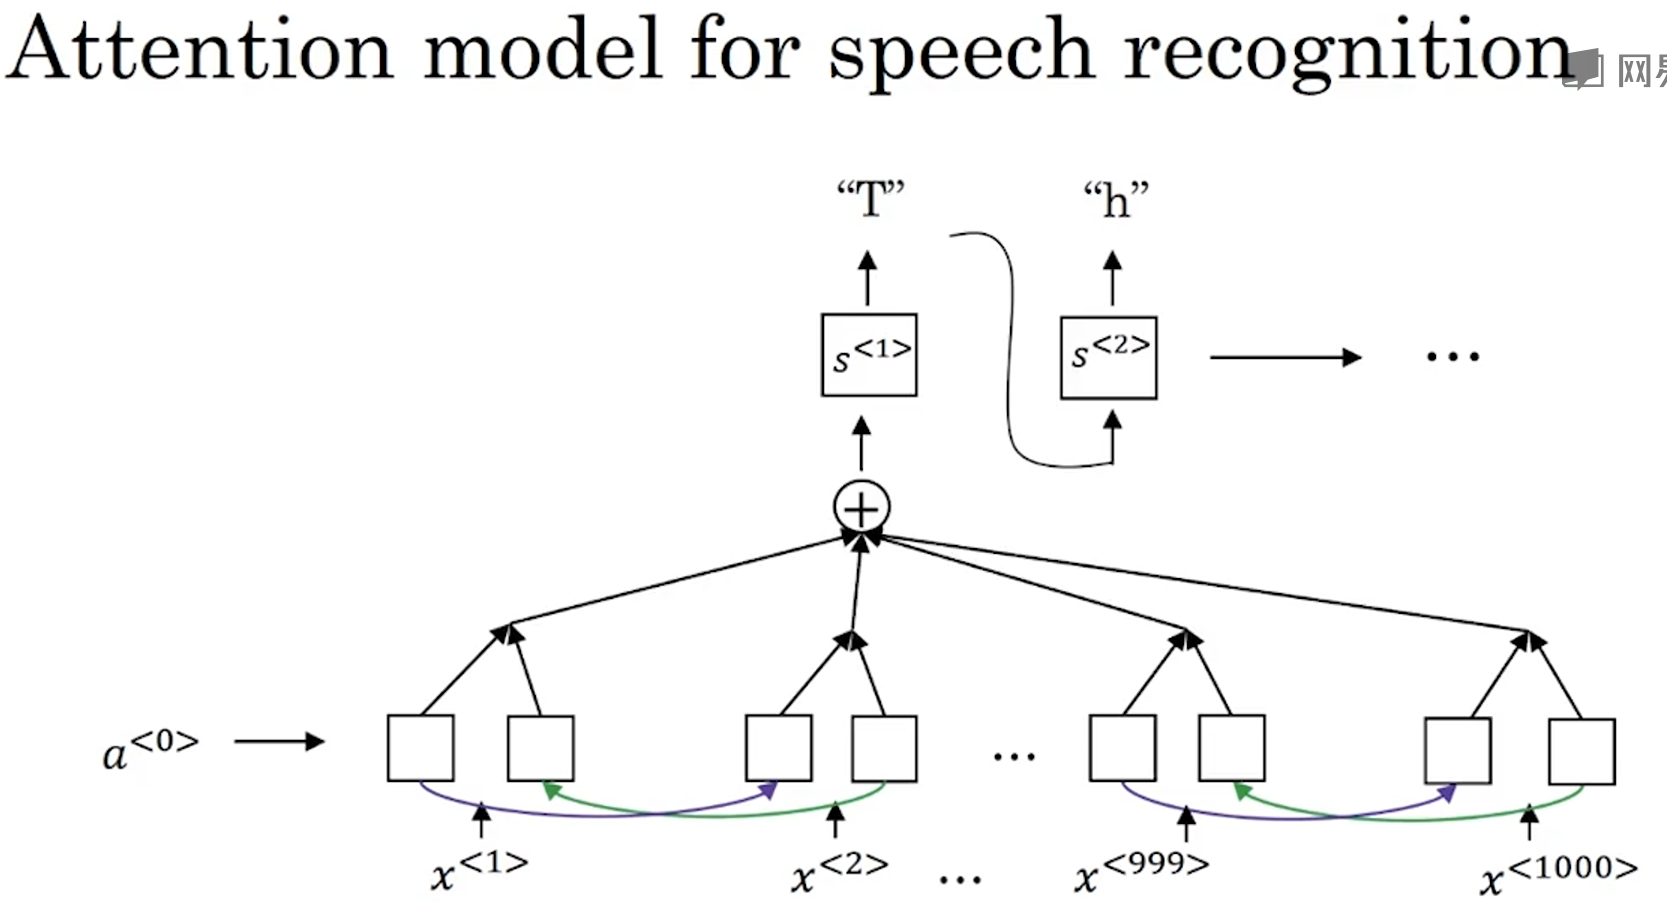 CTC attention model. Connectionist models of Speech processing. Attention model